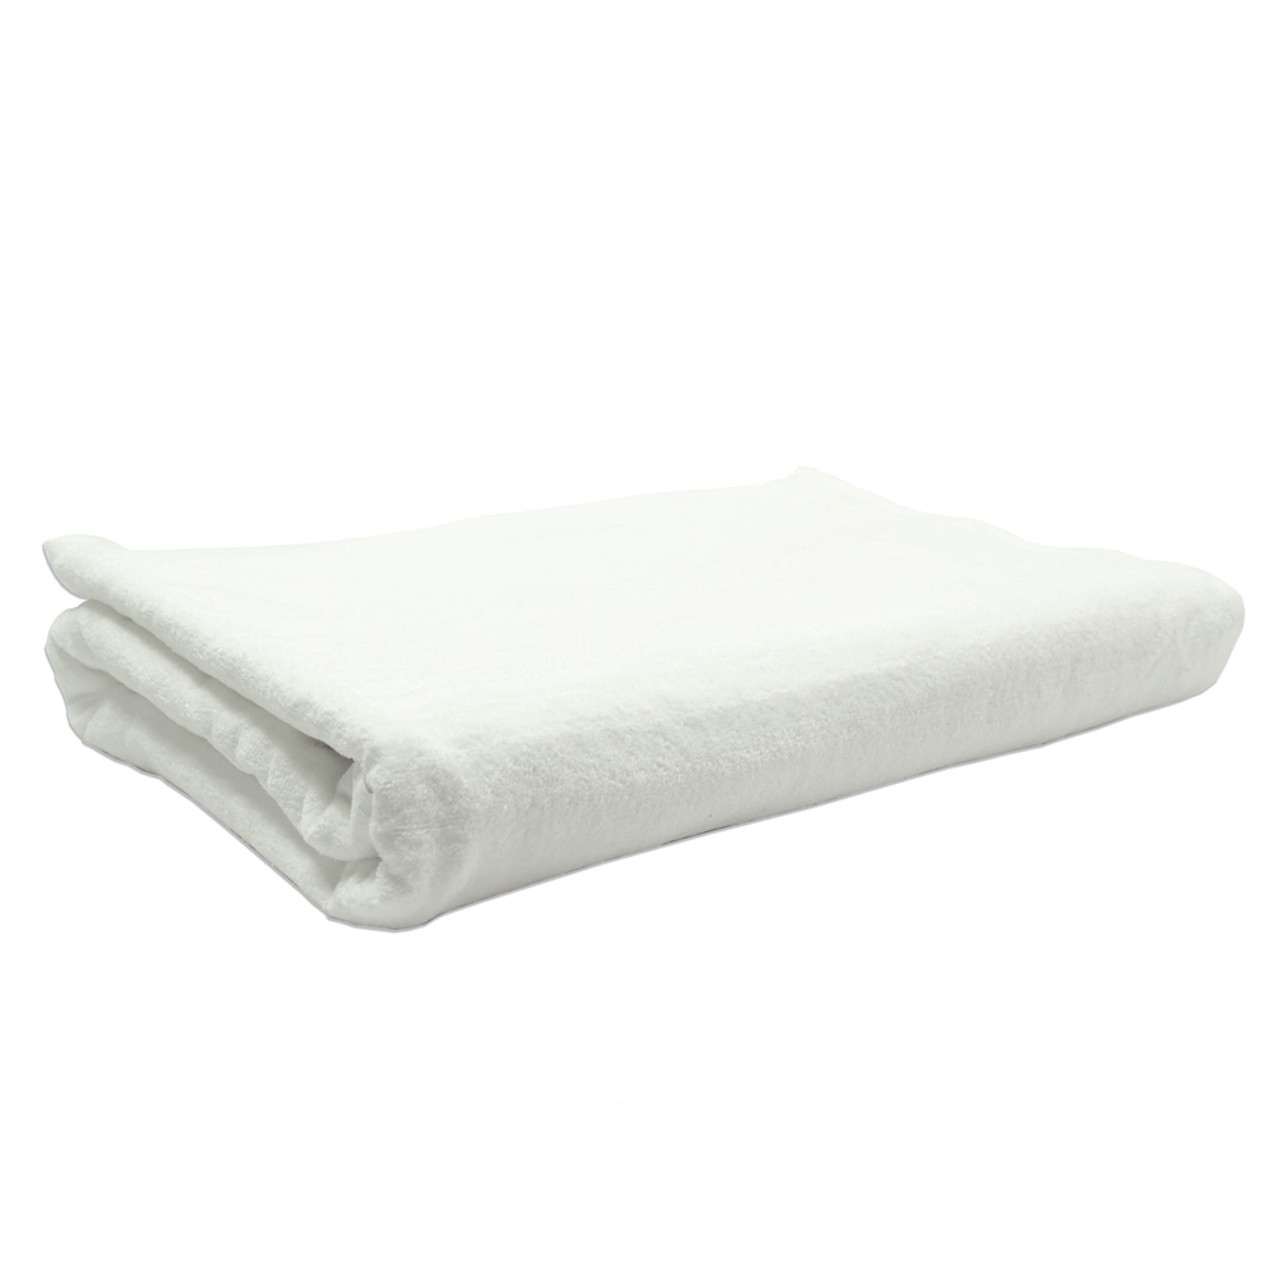 Plush Velour Large Hand Towel 16x26 Solid Blank Bath Hand Towel Plain Solid  Plush Velour Hand Towel 